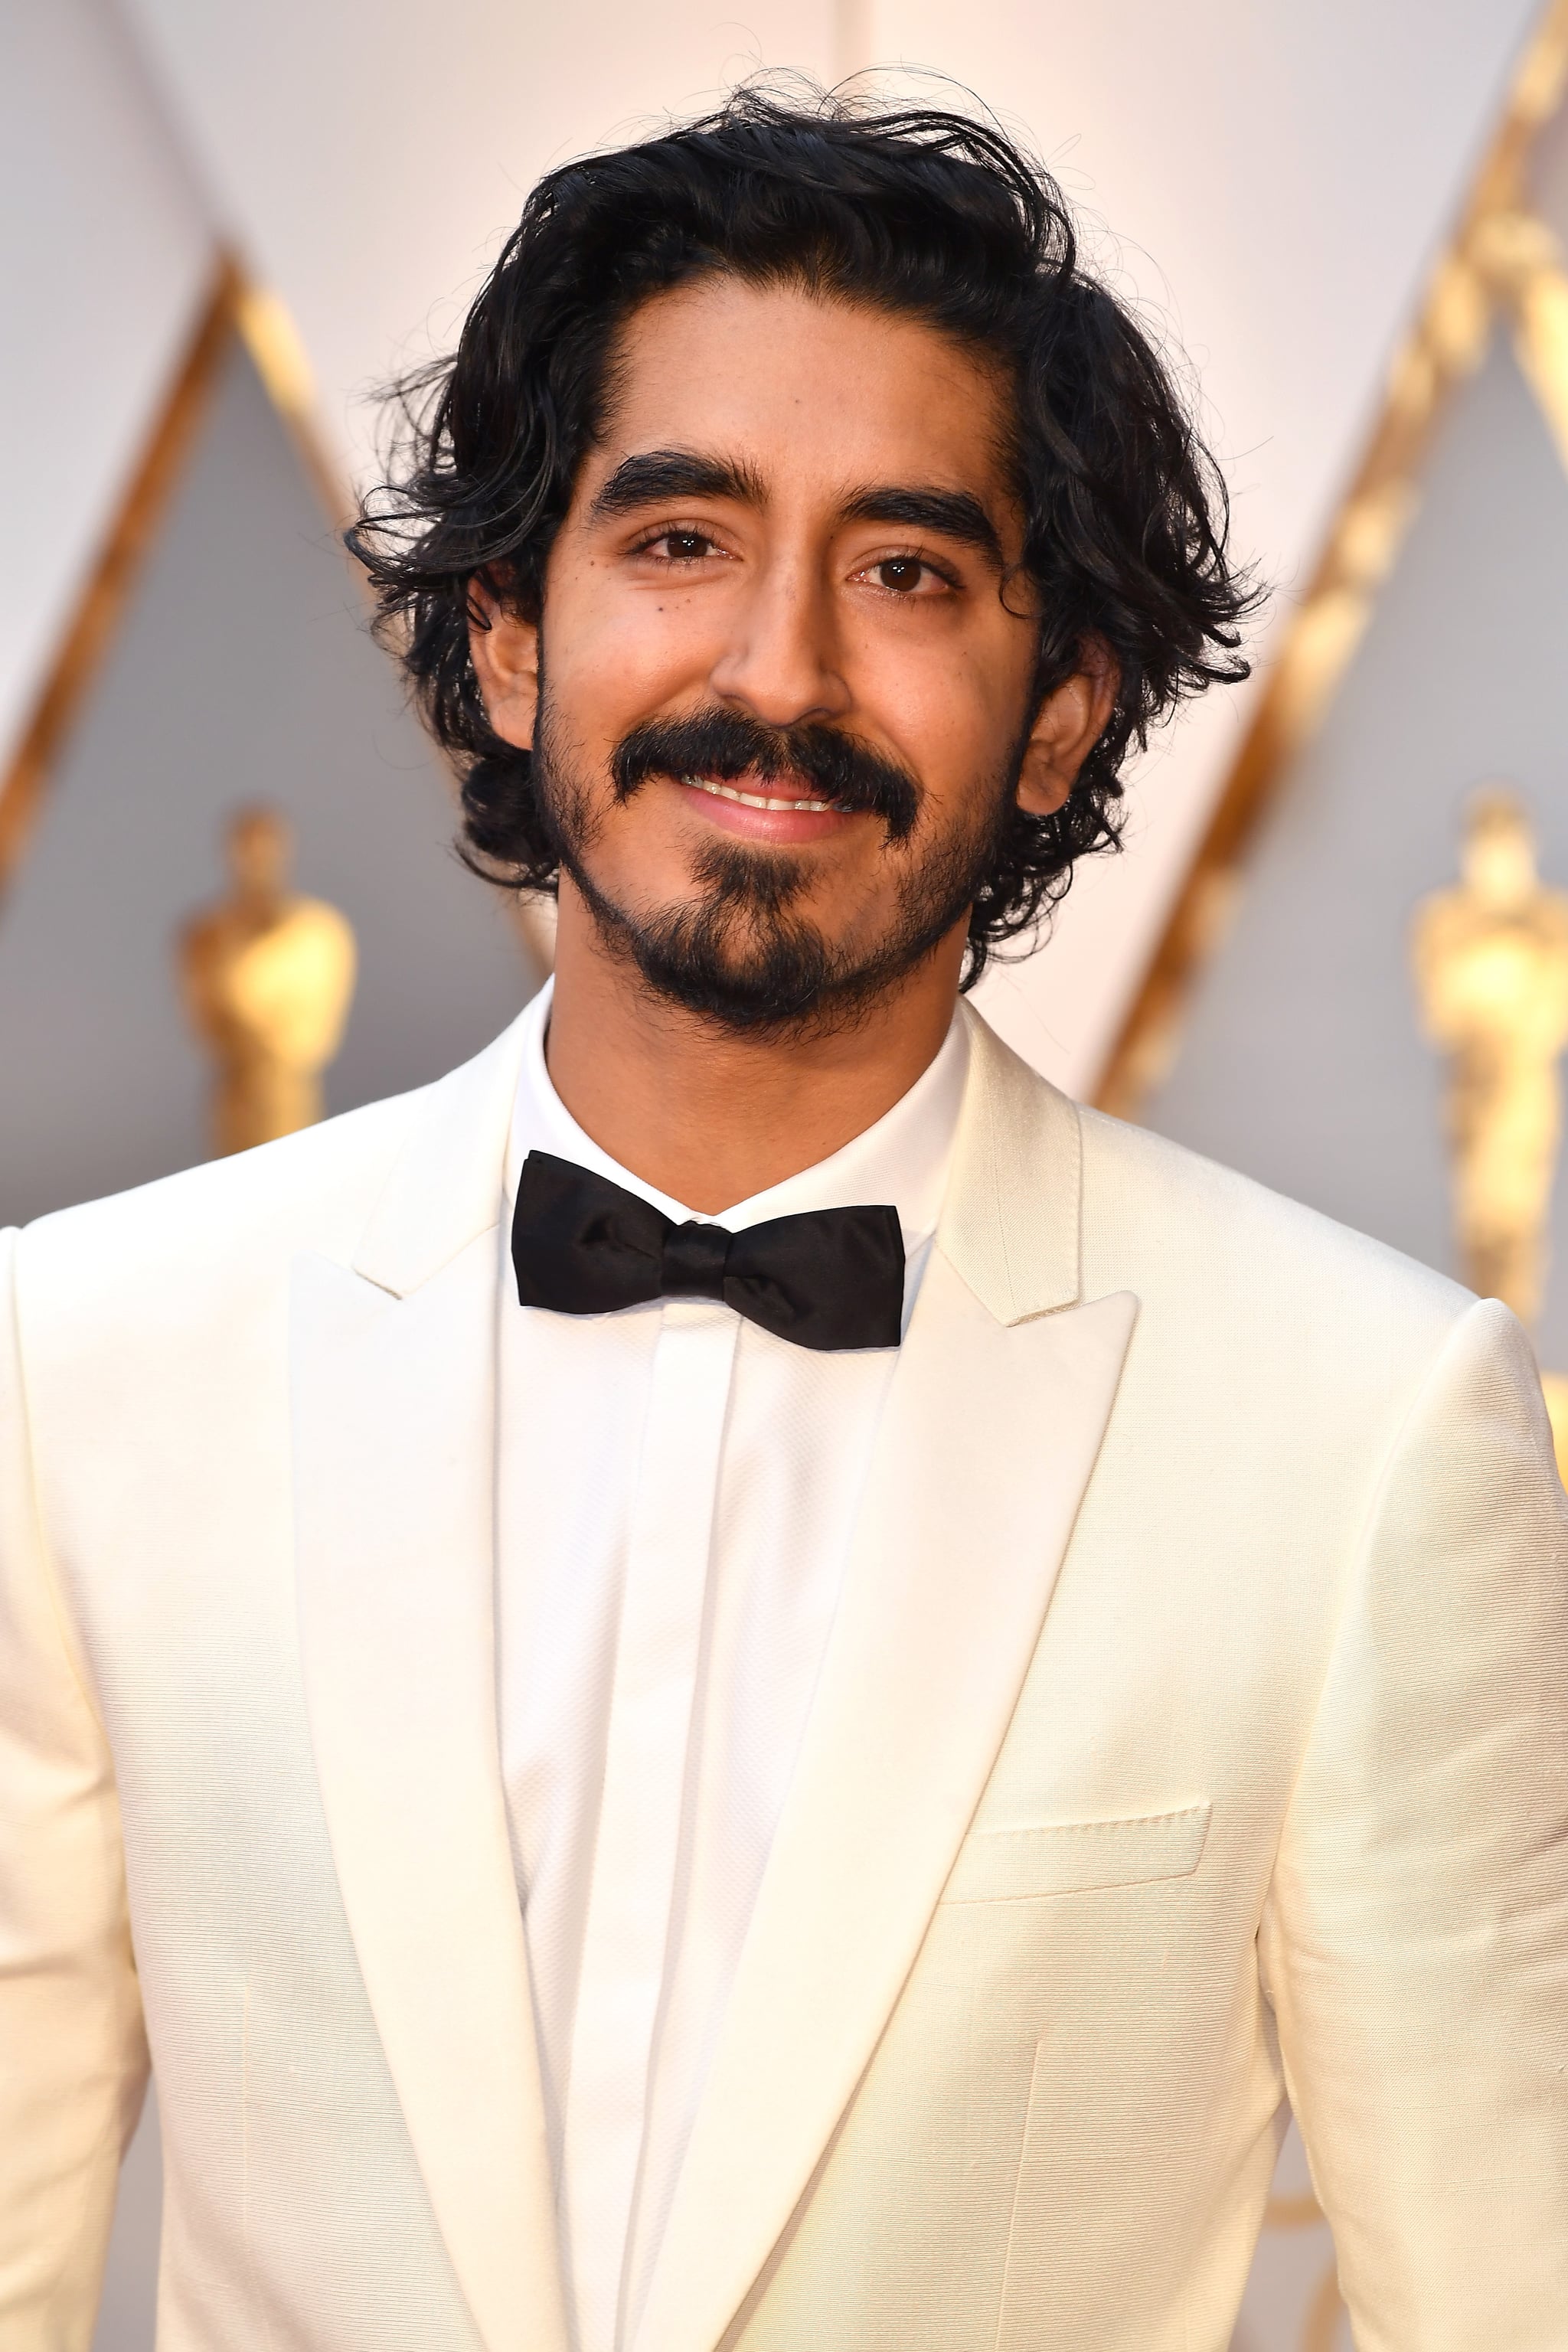 Growing up my Hair I really wanna go for the Dev Patel look but I would  also like your guys opinion on my hair and what hairstyle would suit me   rmalehairadvice